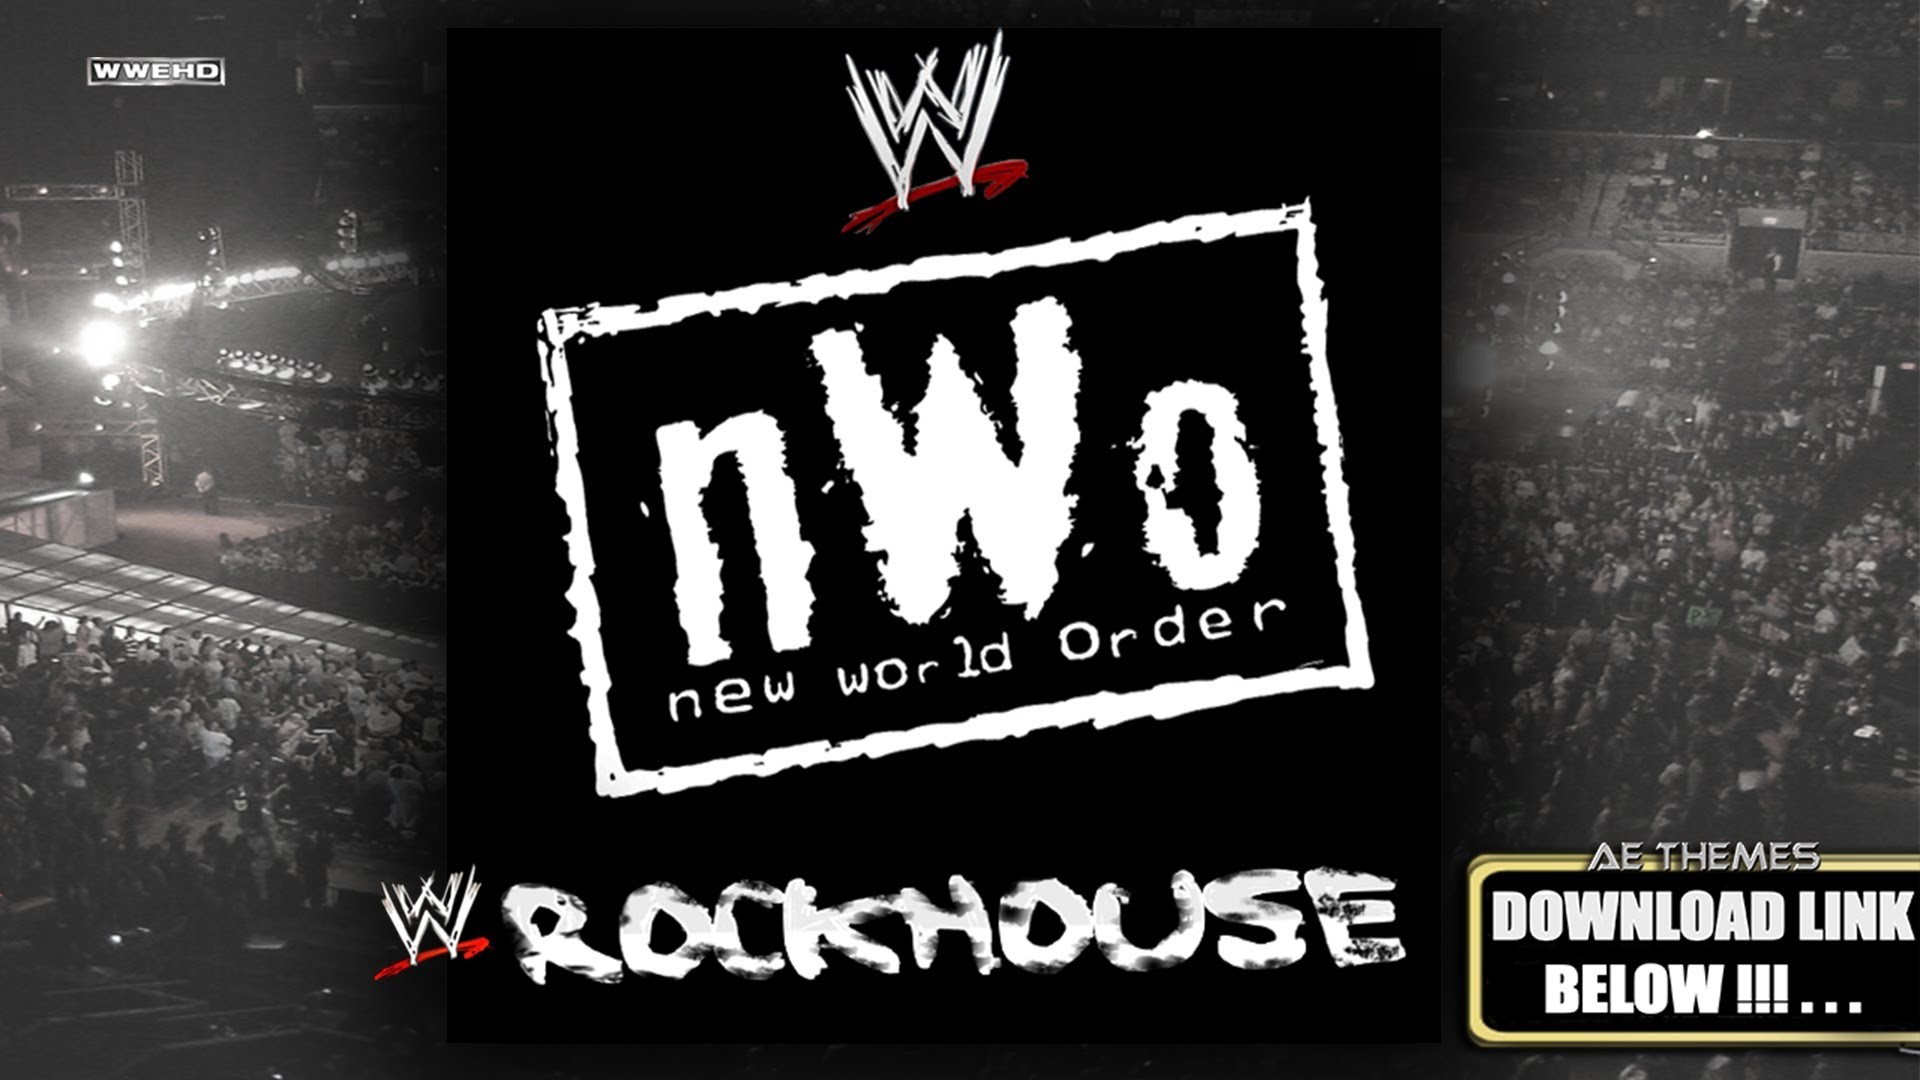 1920x1080 WWE: "Rockhouse" (New World Order) Theme Song + AE (Arena Effect) - YouTube